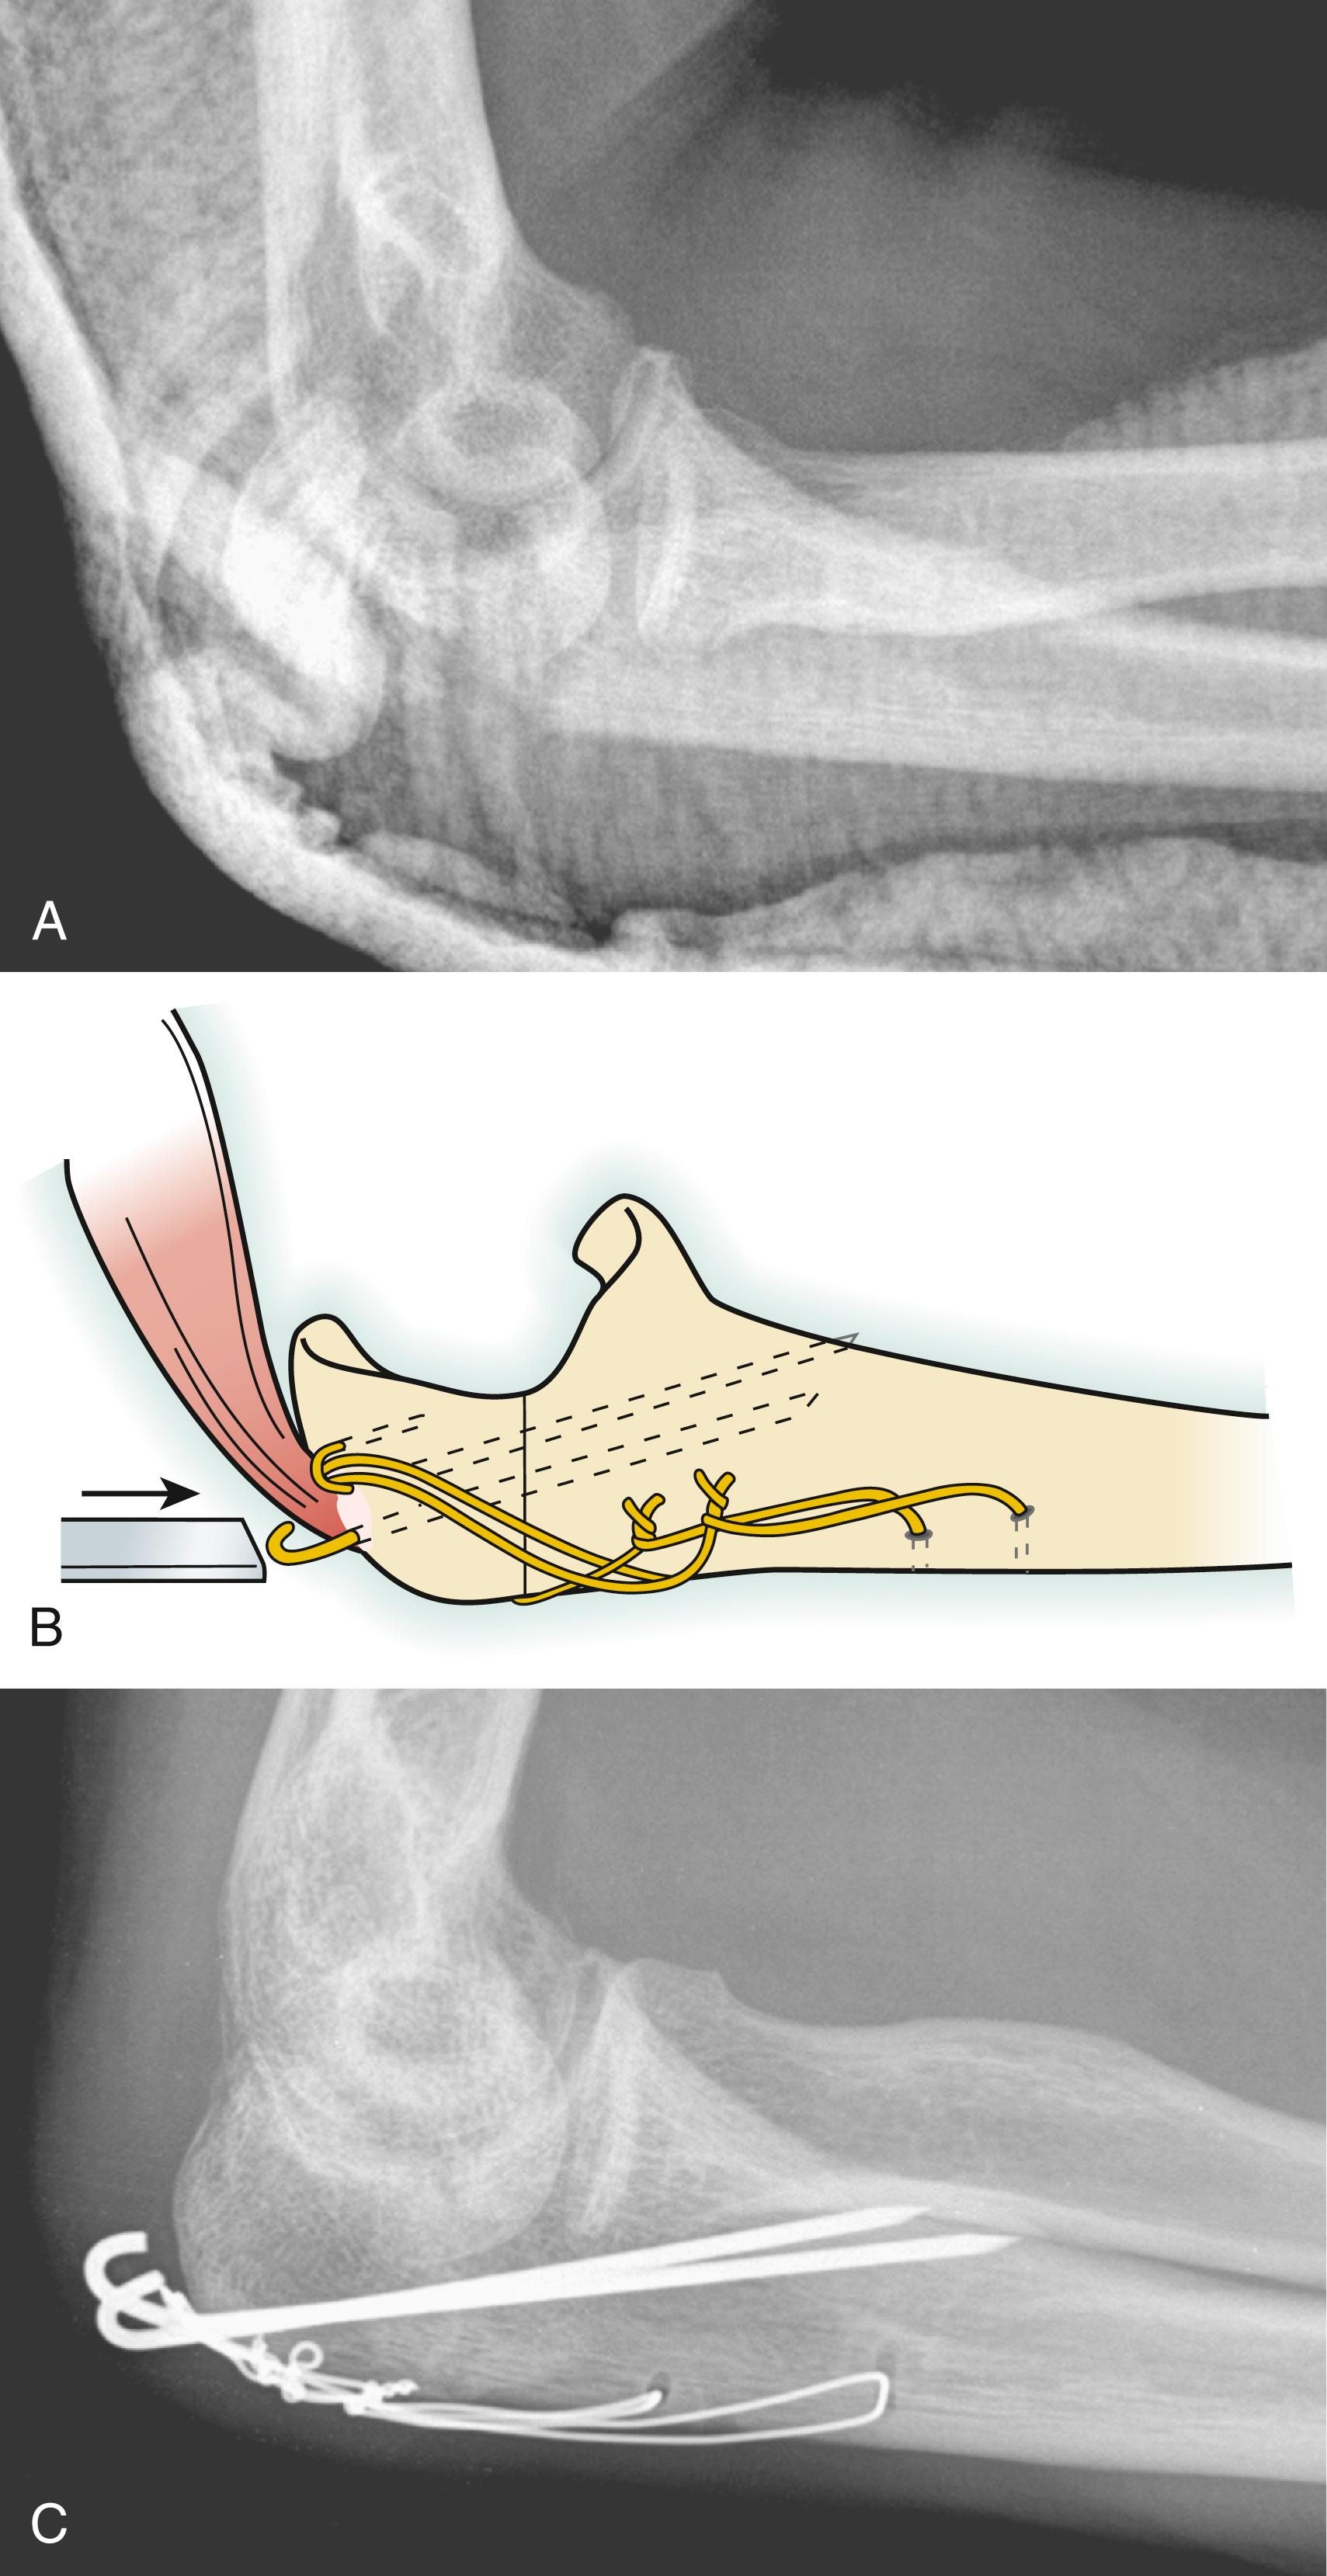 Fig. 20.10, Tension band wiring. A, Tension band wiring is suitable for simple fractures without fracture of the radial head or coronoid or dislocation/subluxation of the ulnohumeral joint. B, A technique using anteriorly oriented Kirschner wires, impaction of the proximal ends into the olecranon beneath the triceps insertion, and two small-gauge tension wires can limit hardware-related problems. C, Active motion is initiated the morning after surgery